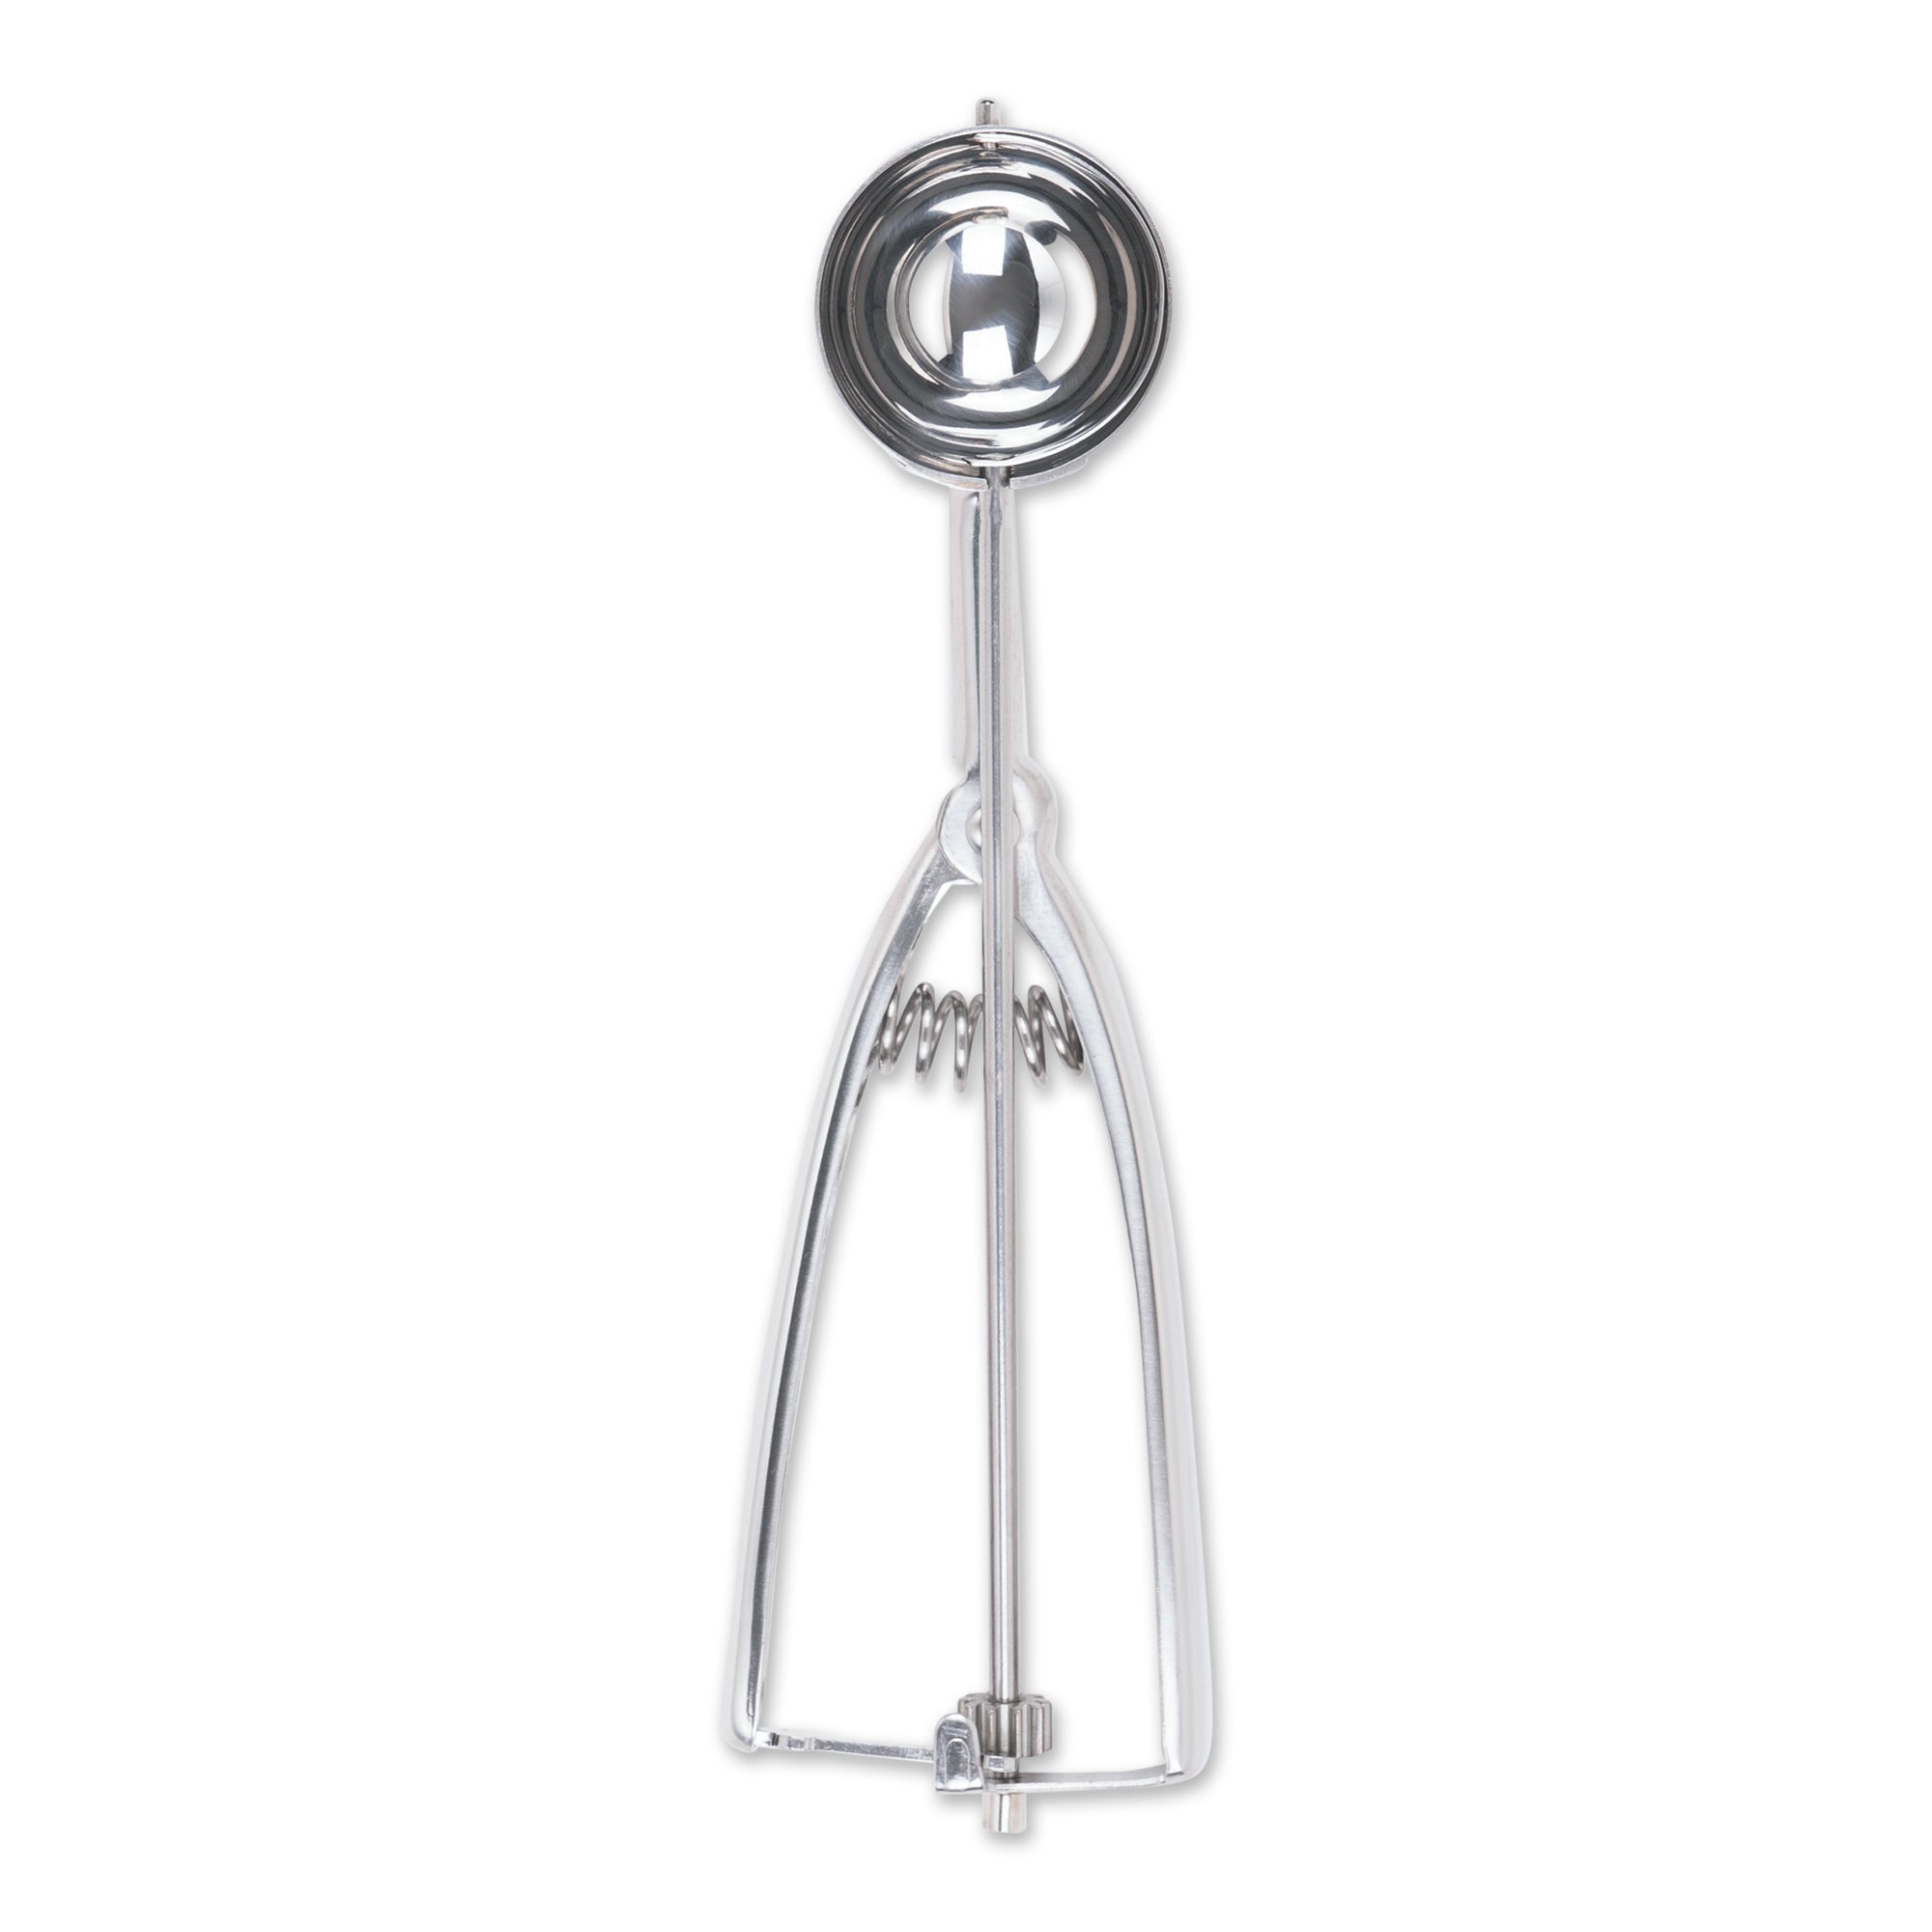 R.S.V.P. Short Coffee Scoop – The Happy Cook